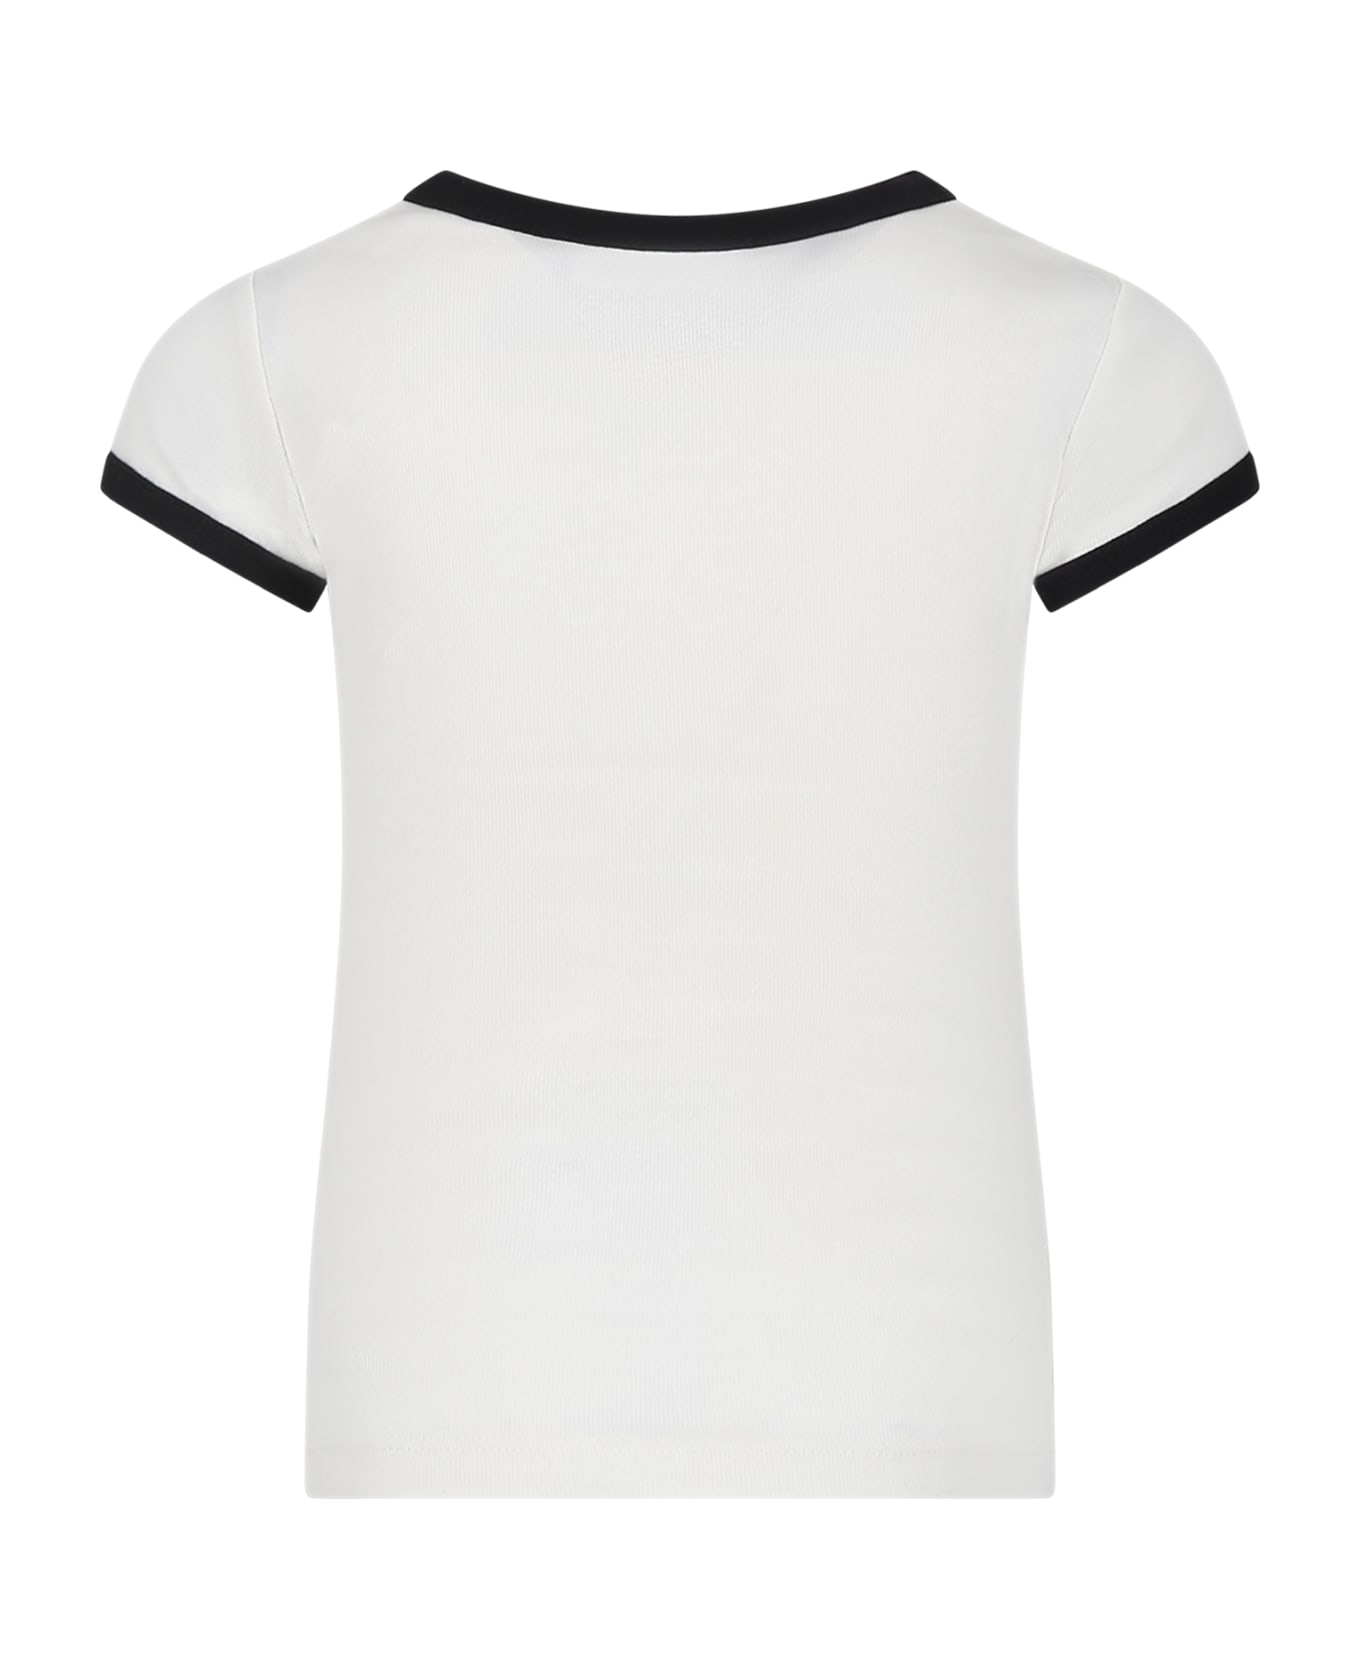 Molo White T-shirt For Girl With Print And Writing - White Tシャツ＆ポロシャツ